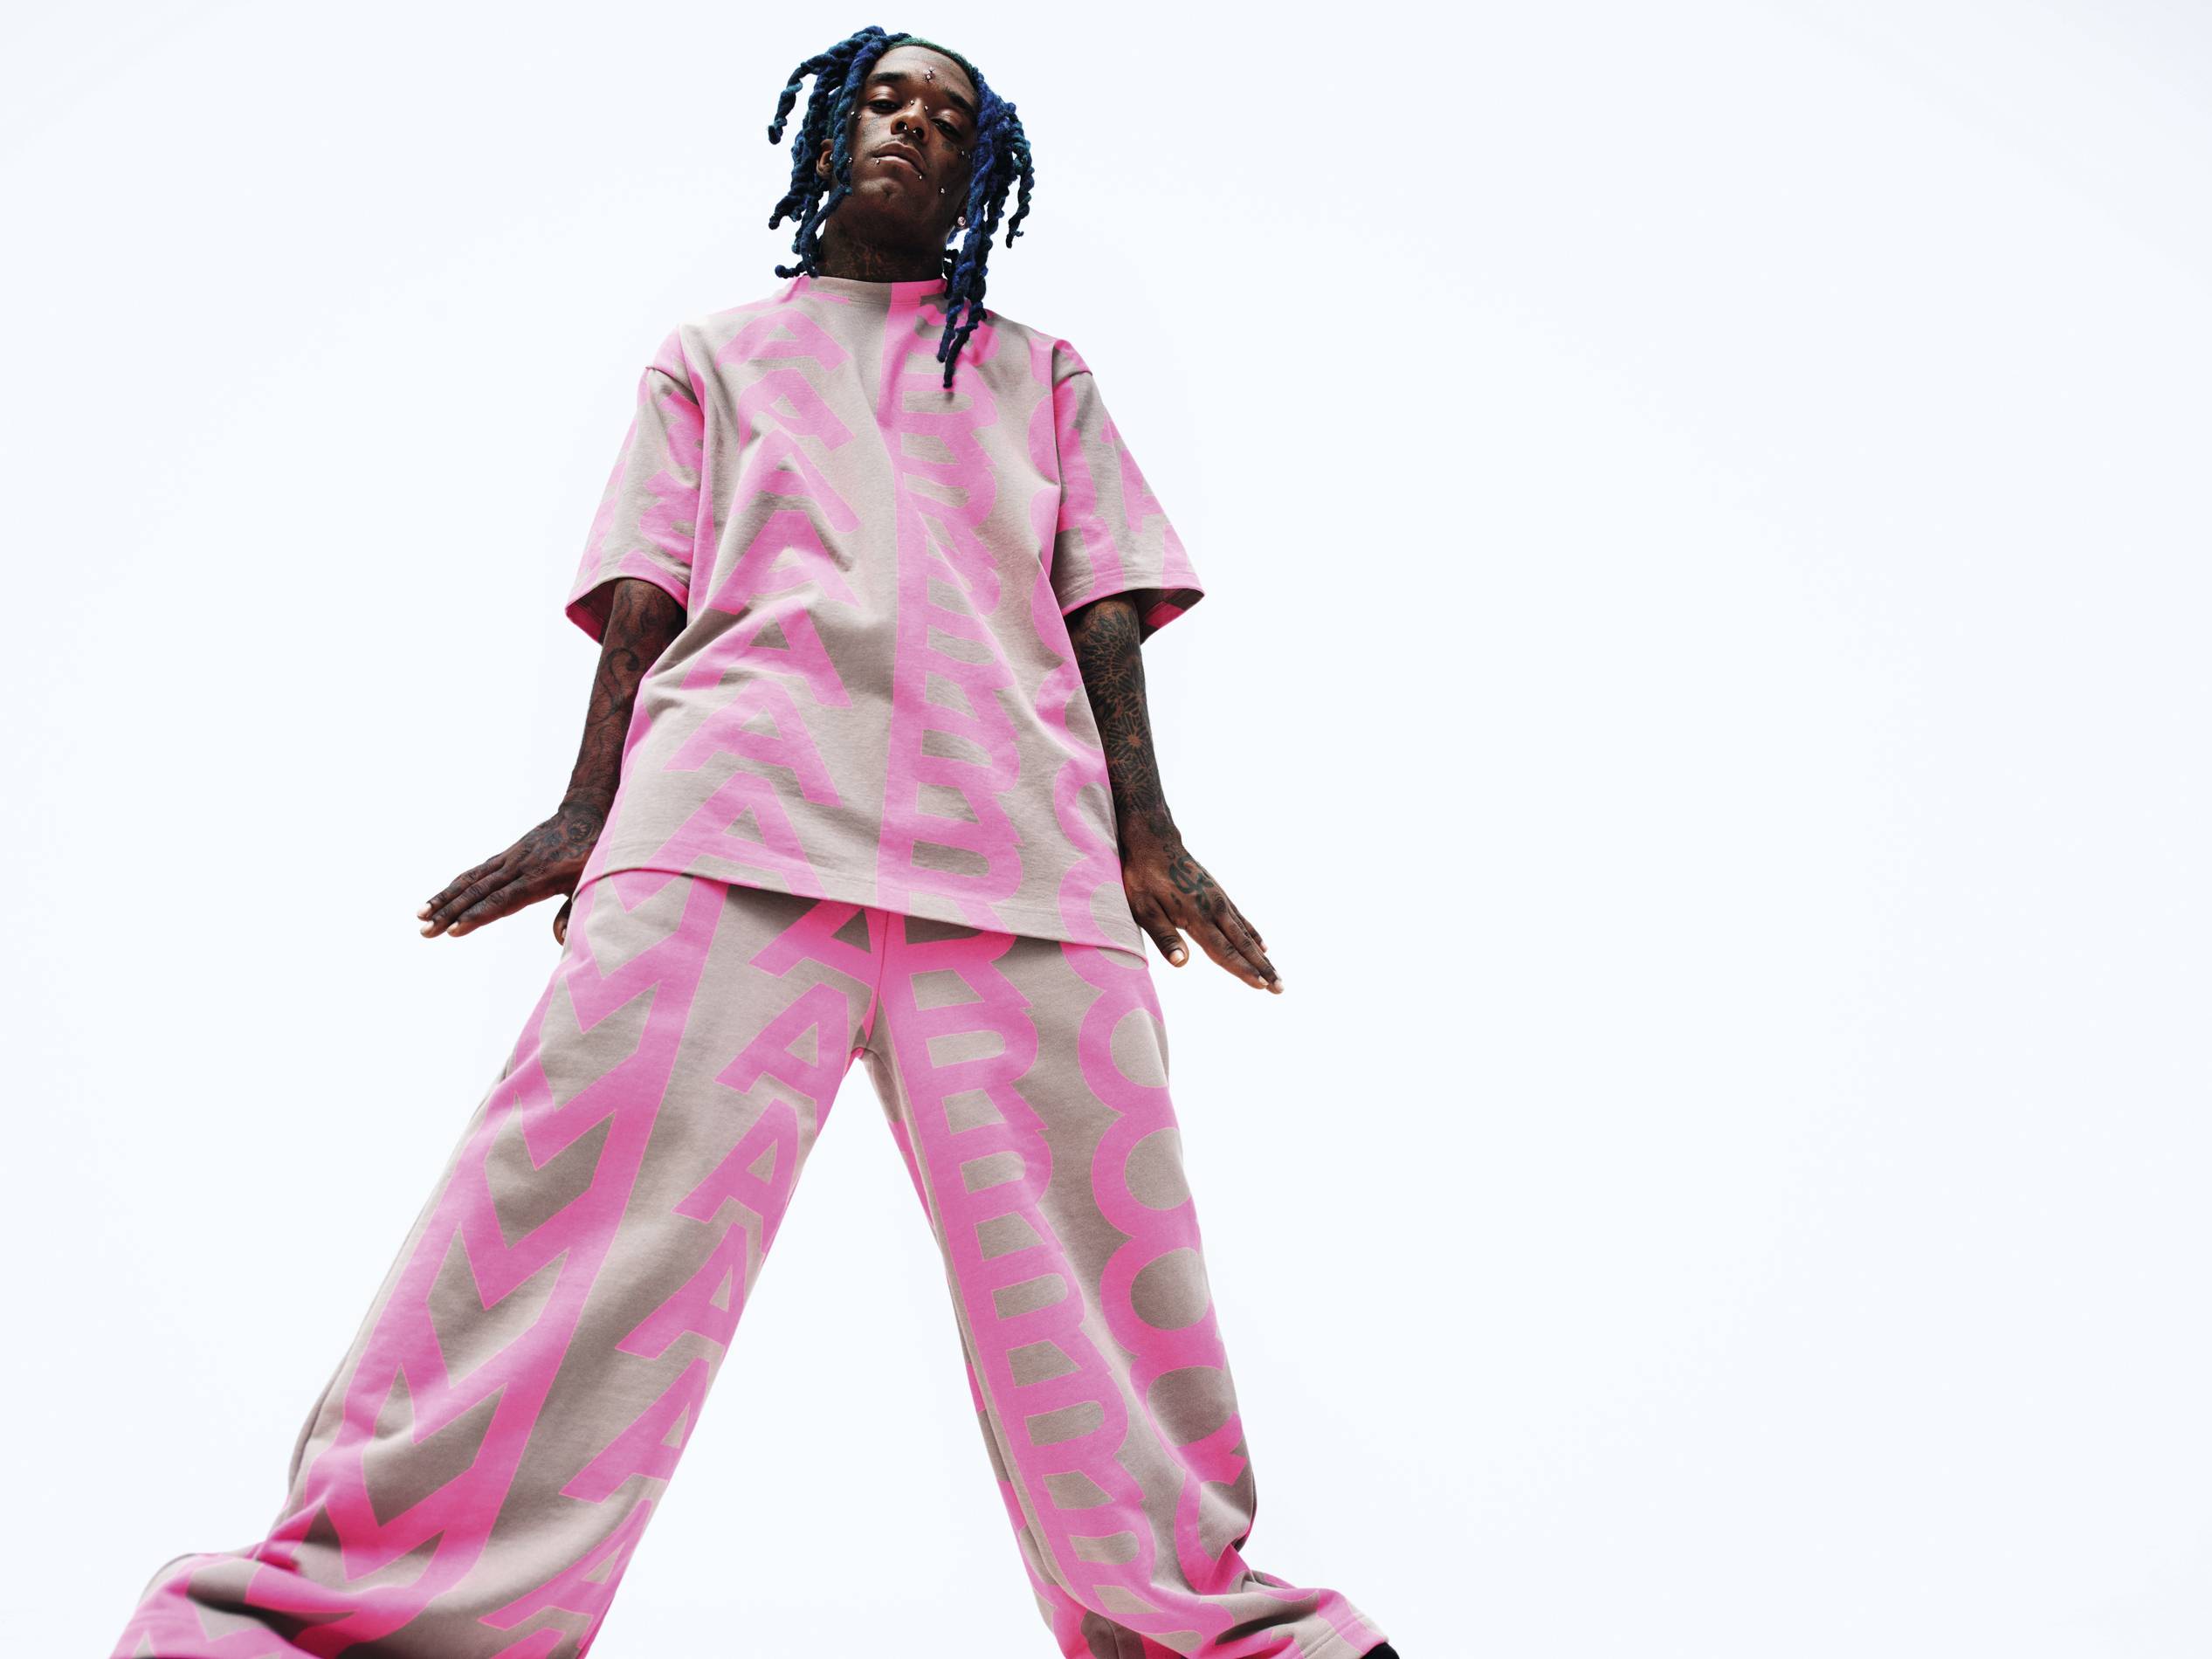 Lil Uzi Vert poses for Marc Jacobs' Spring 2022 Collection